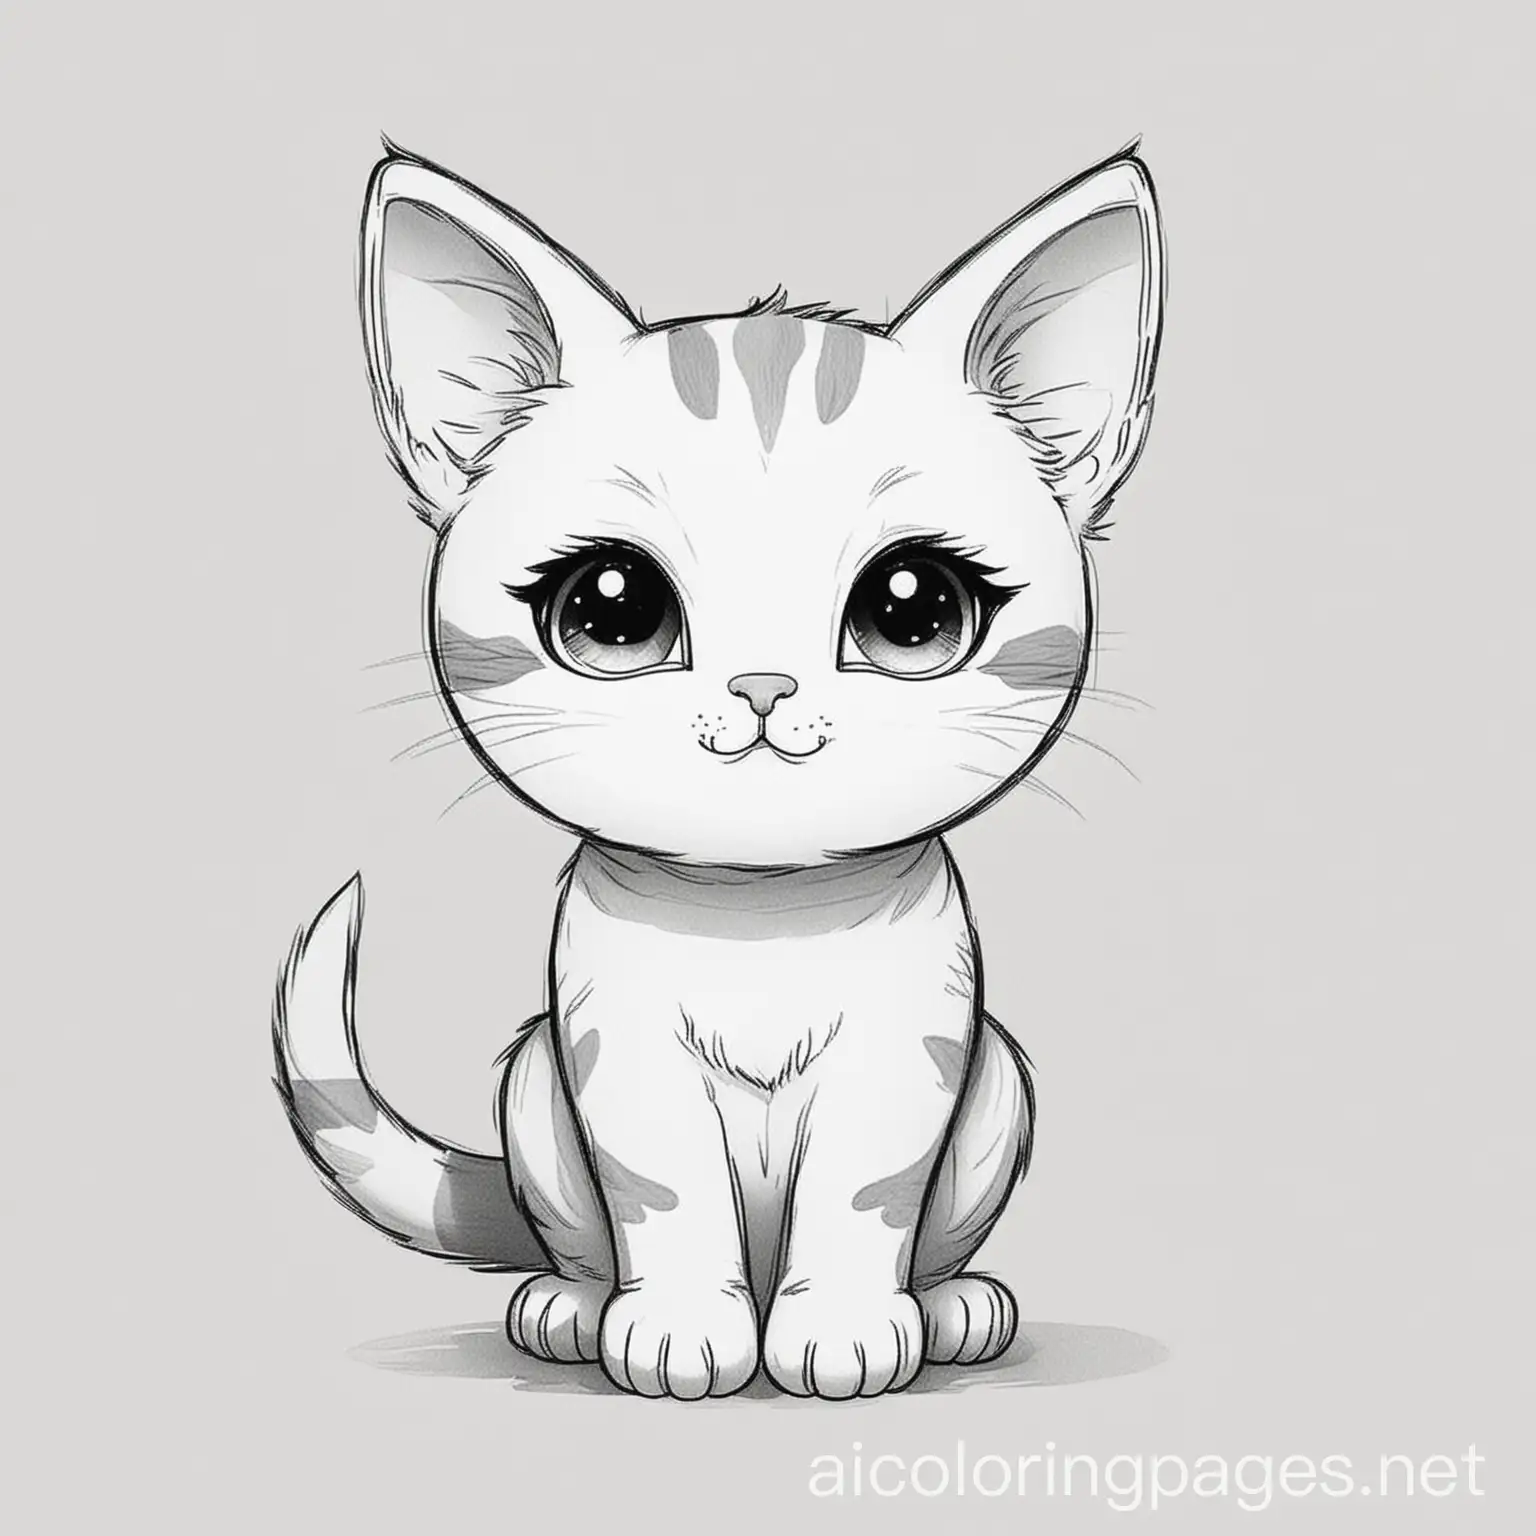 Simple-Coloring-Page-of-a-Cute-Cat-on-White-Background